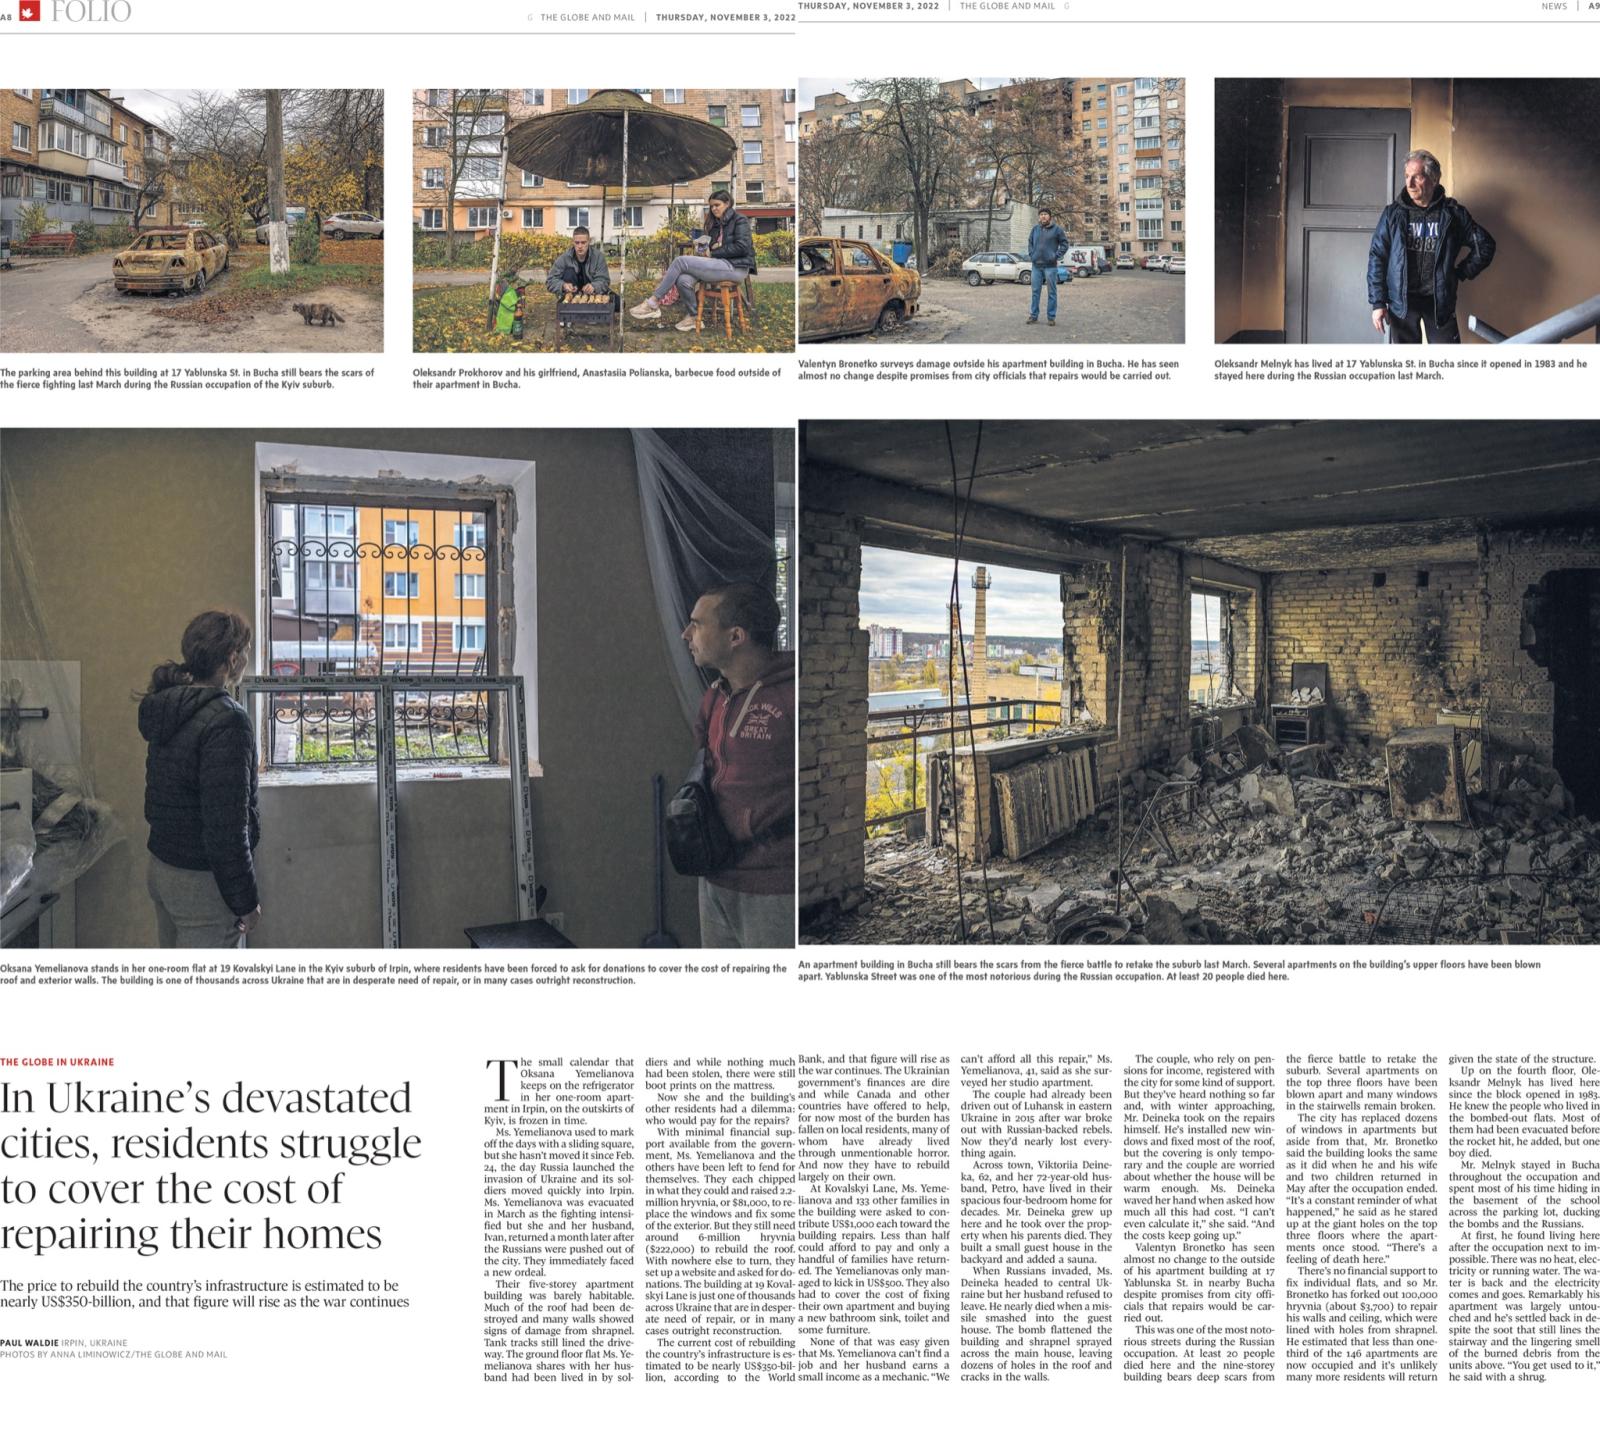 In Ukraine’s decimated cities, residents struggle to cover the cost of repairing their homes